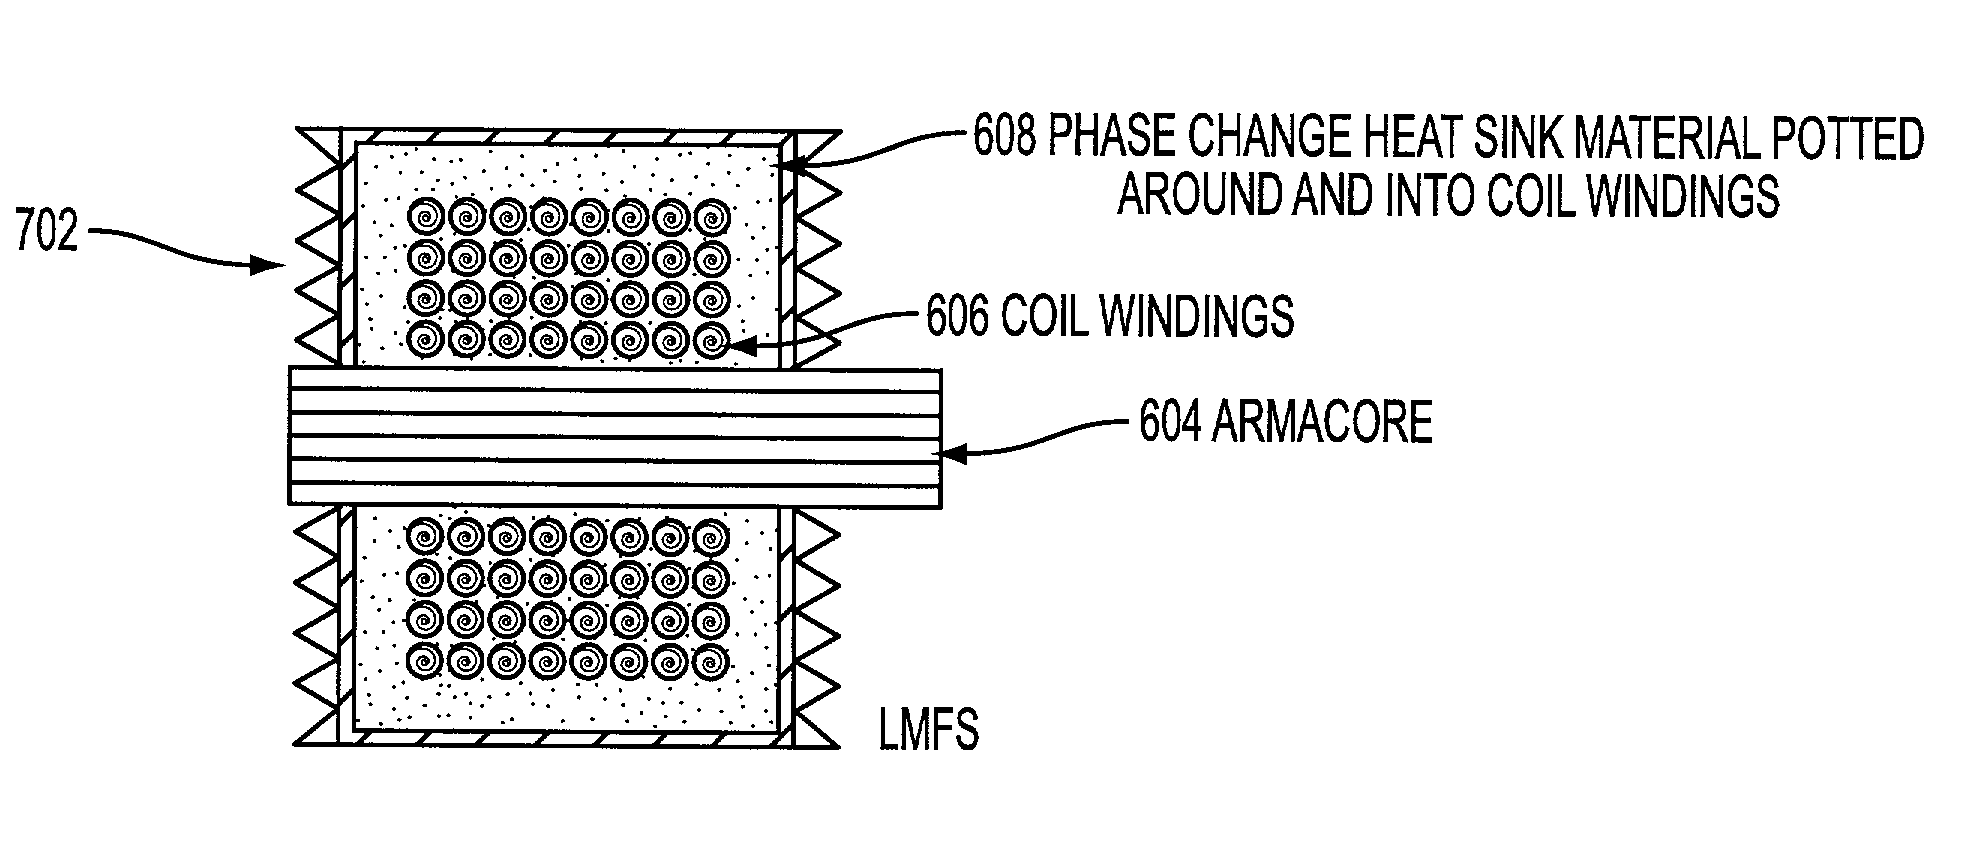 Phase change heat sink for use in electrical solenoids and motors